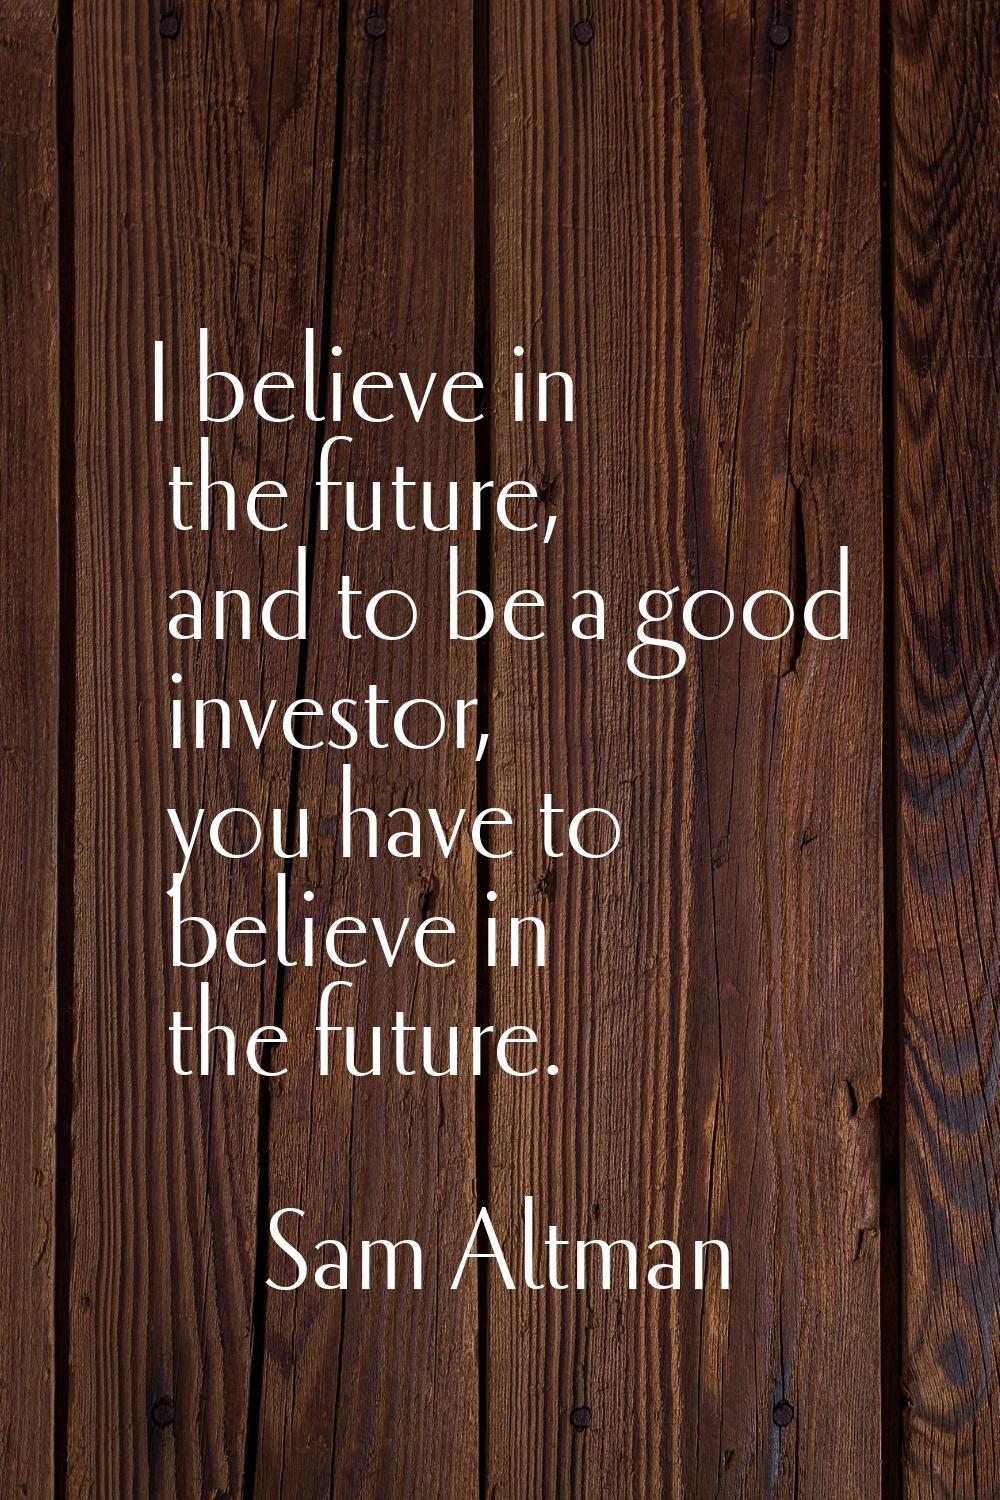 I believe in the future, and to be a good investor, you have to believe in the future.